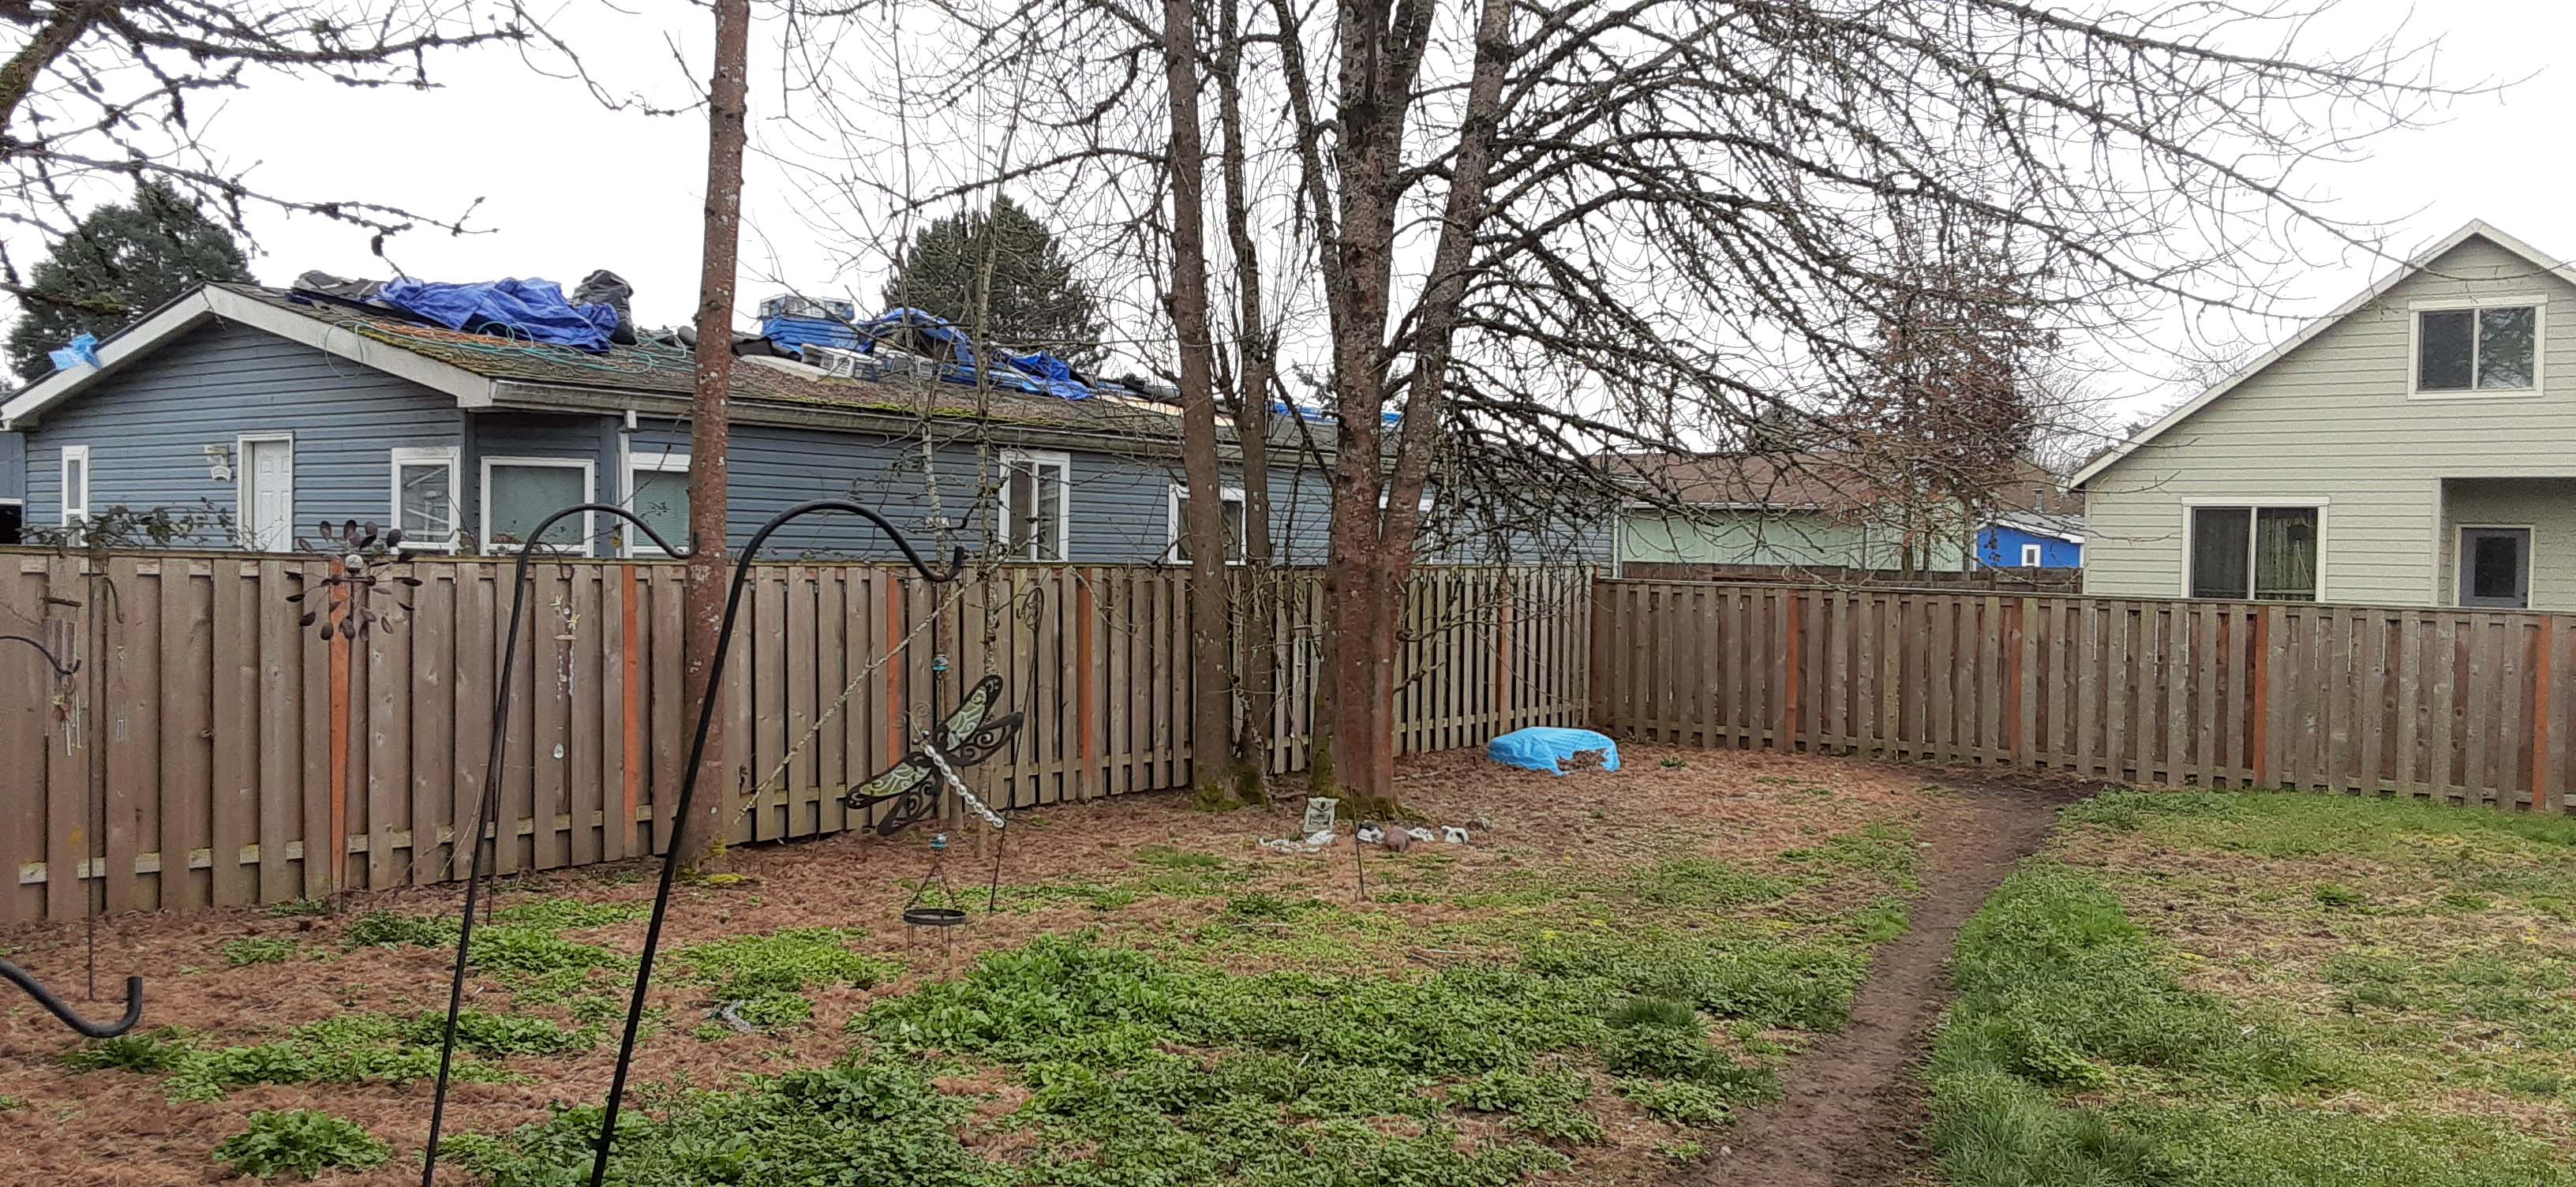 Before image of backyard with patchy grass and dirt path